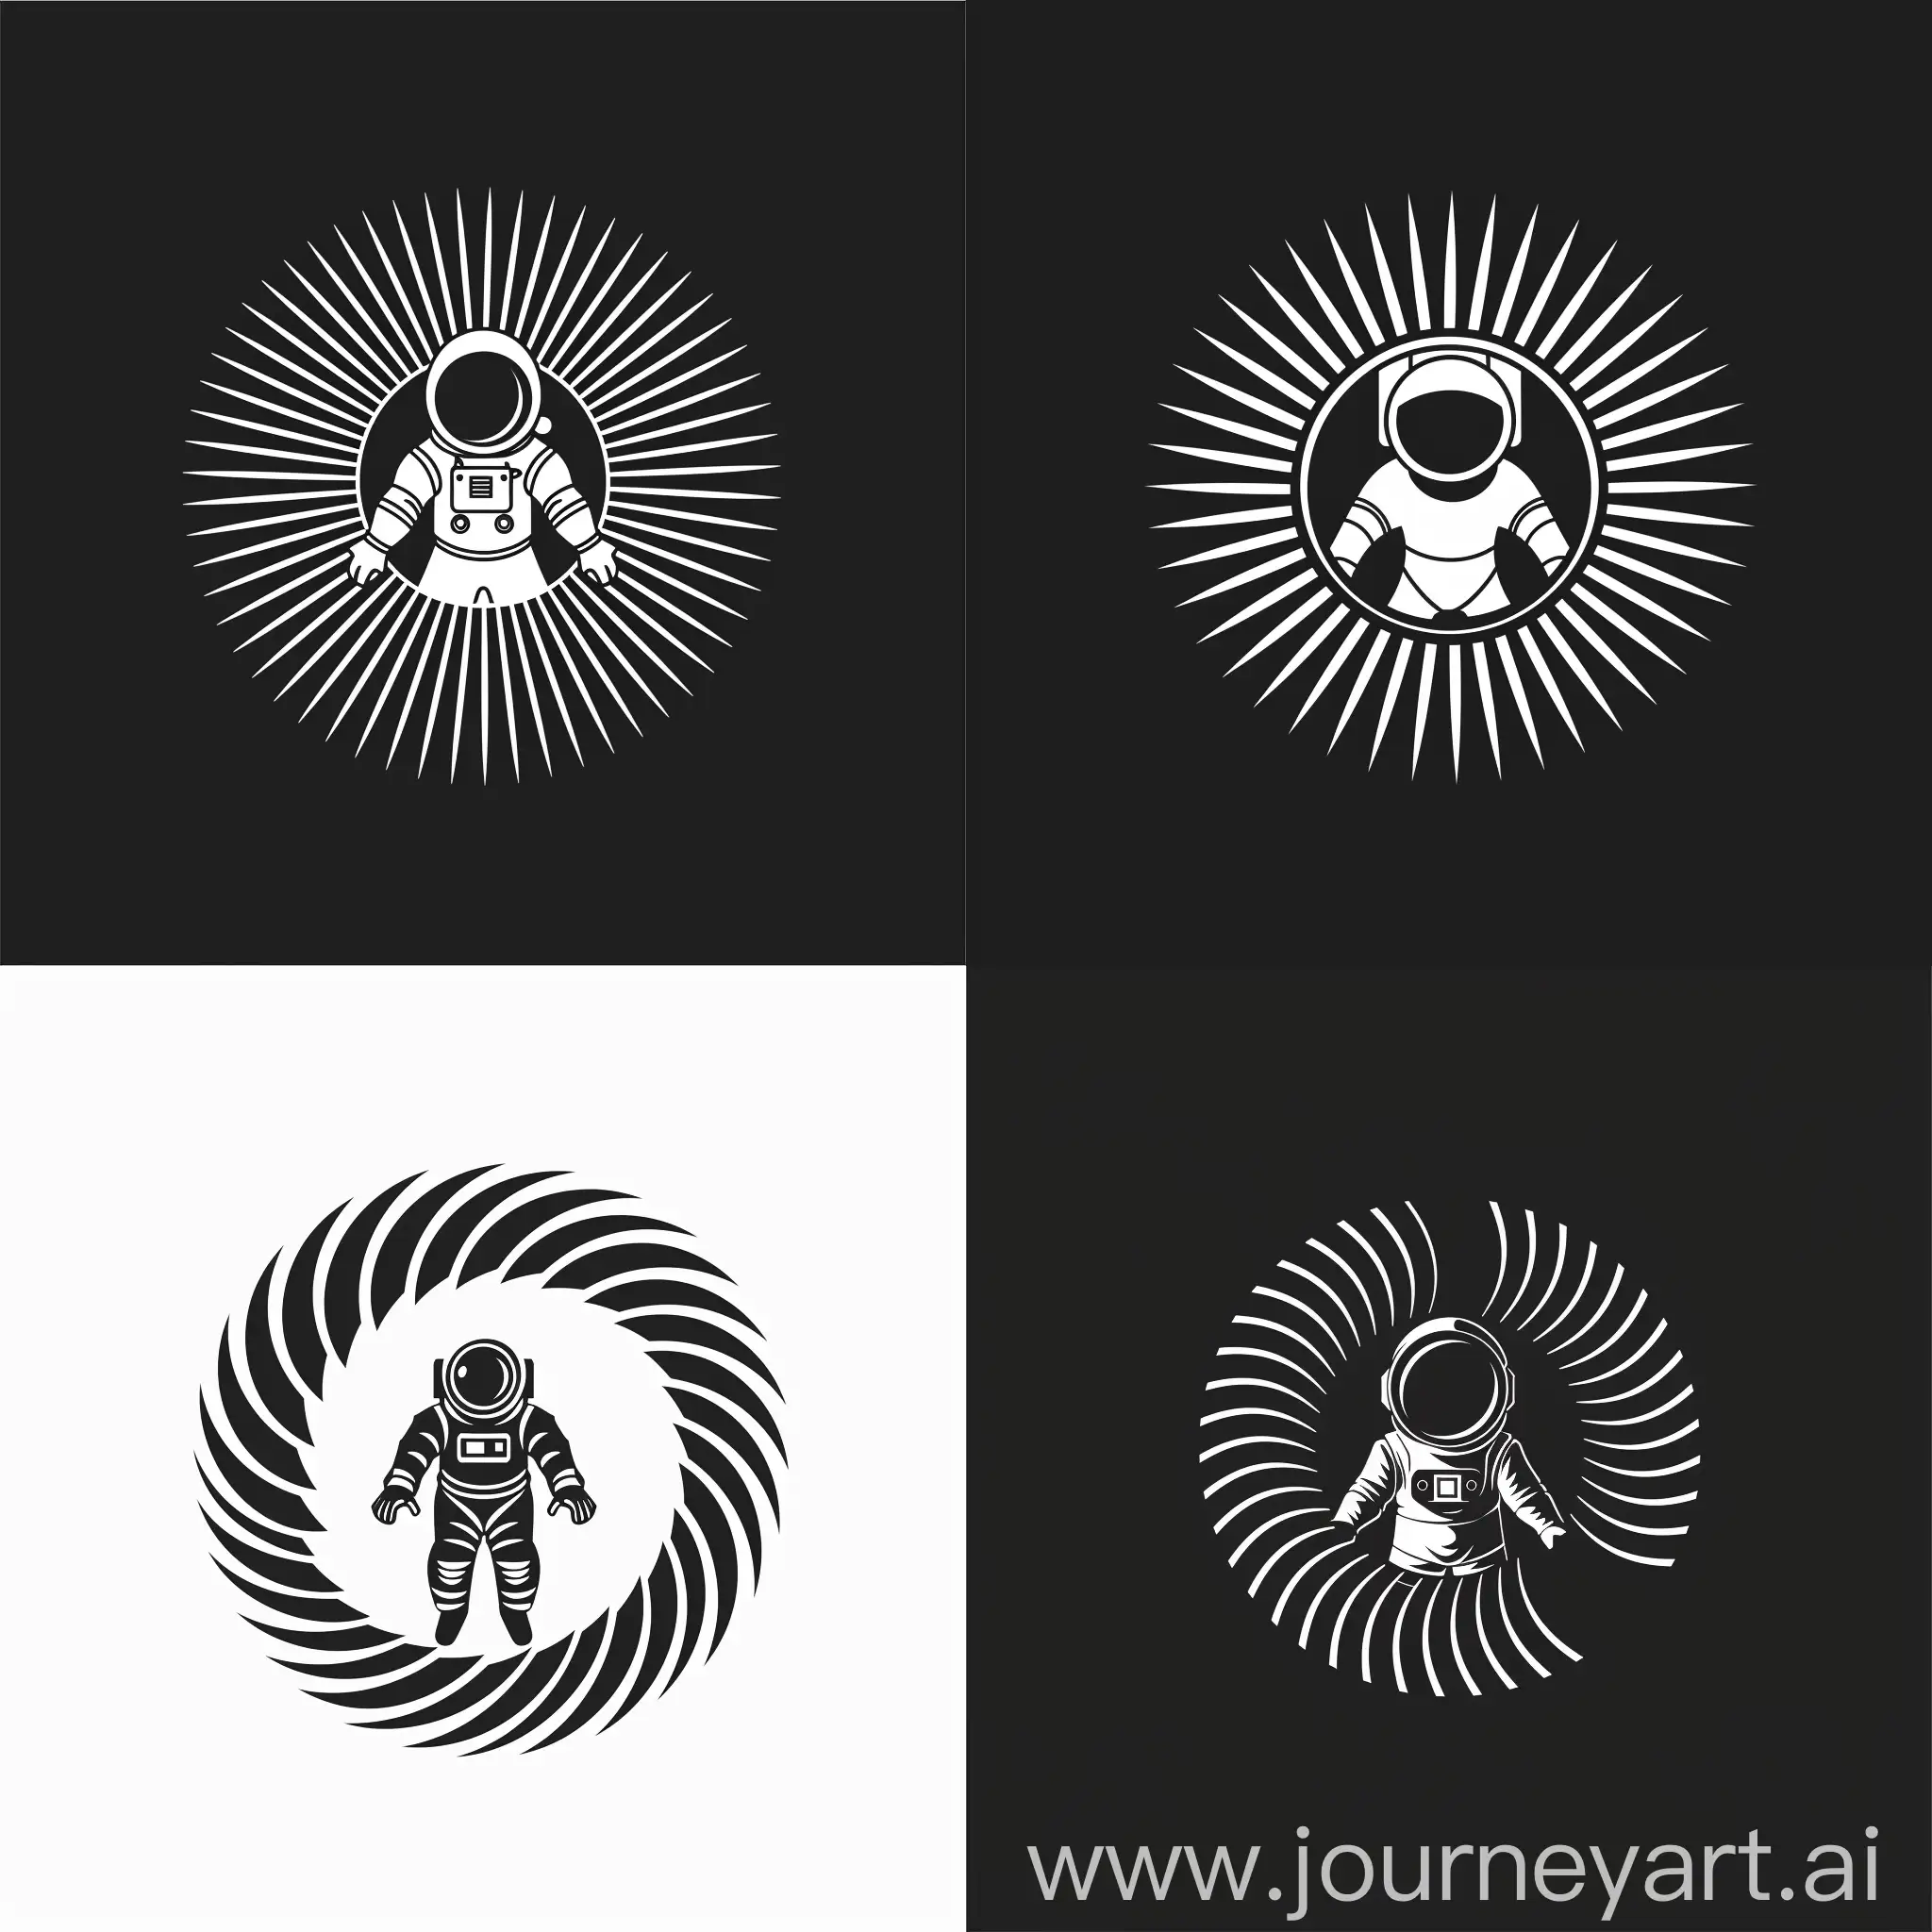 Generate a minimalist black and white logo design featuring a stylized astronaut figure within a circle formed by fan blades. Focus on simplicity and clean lines to convey a modern aesthetic. Ensure the contrast between the astronaut and background for clarity.